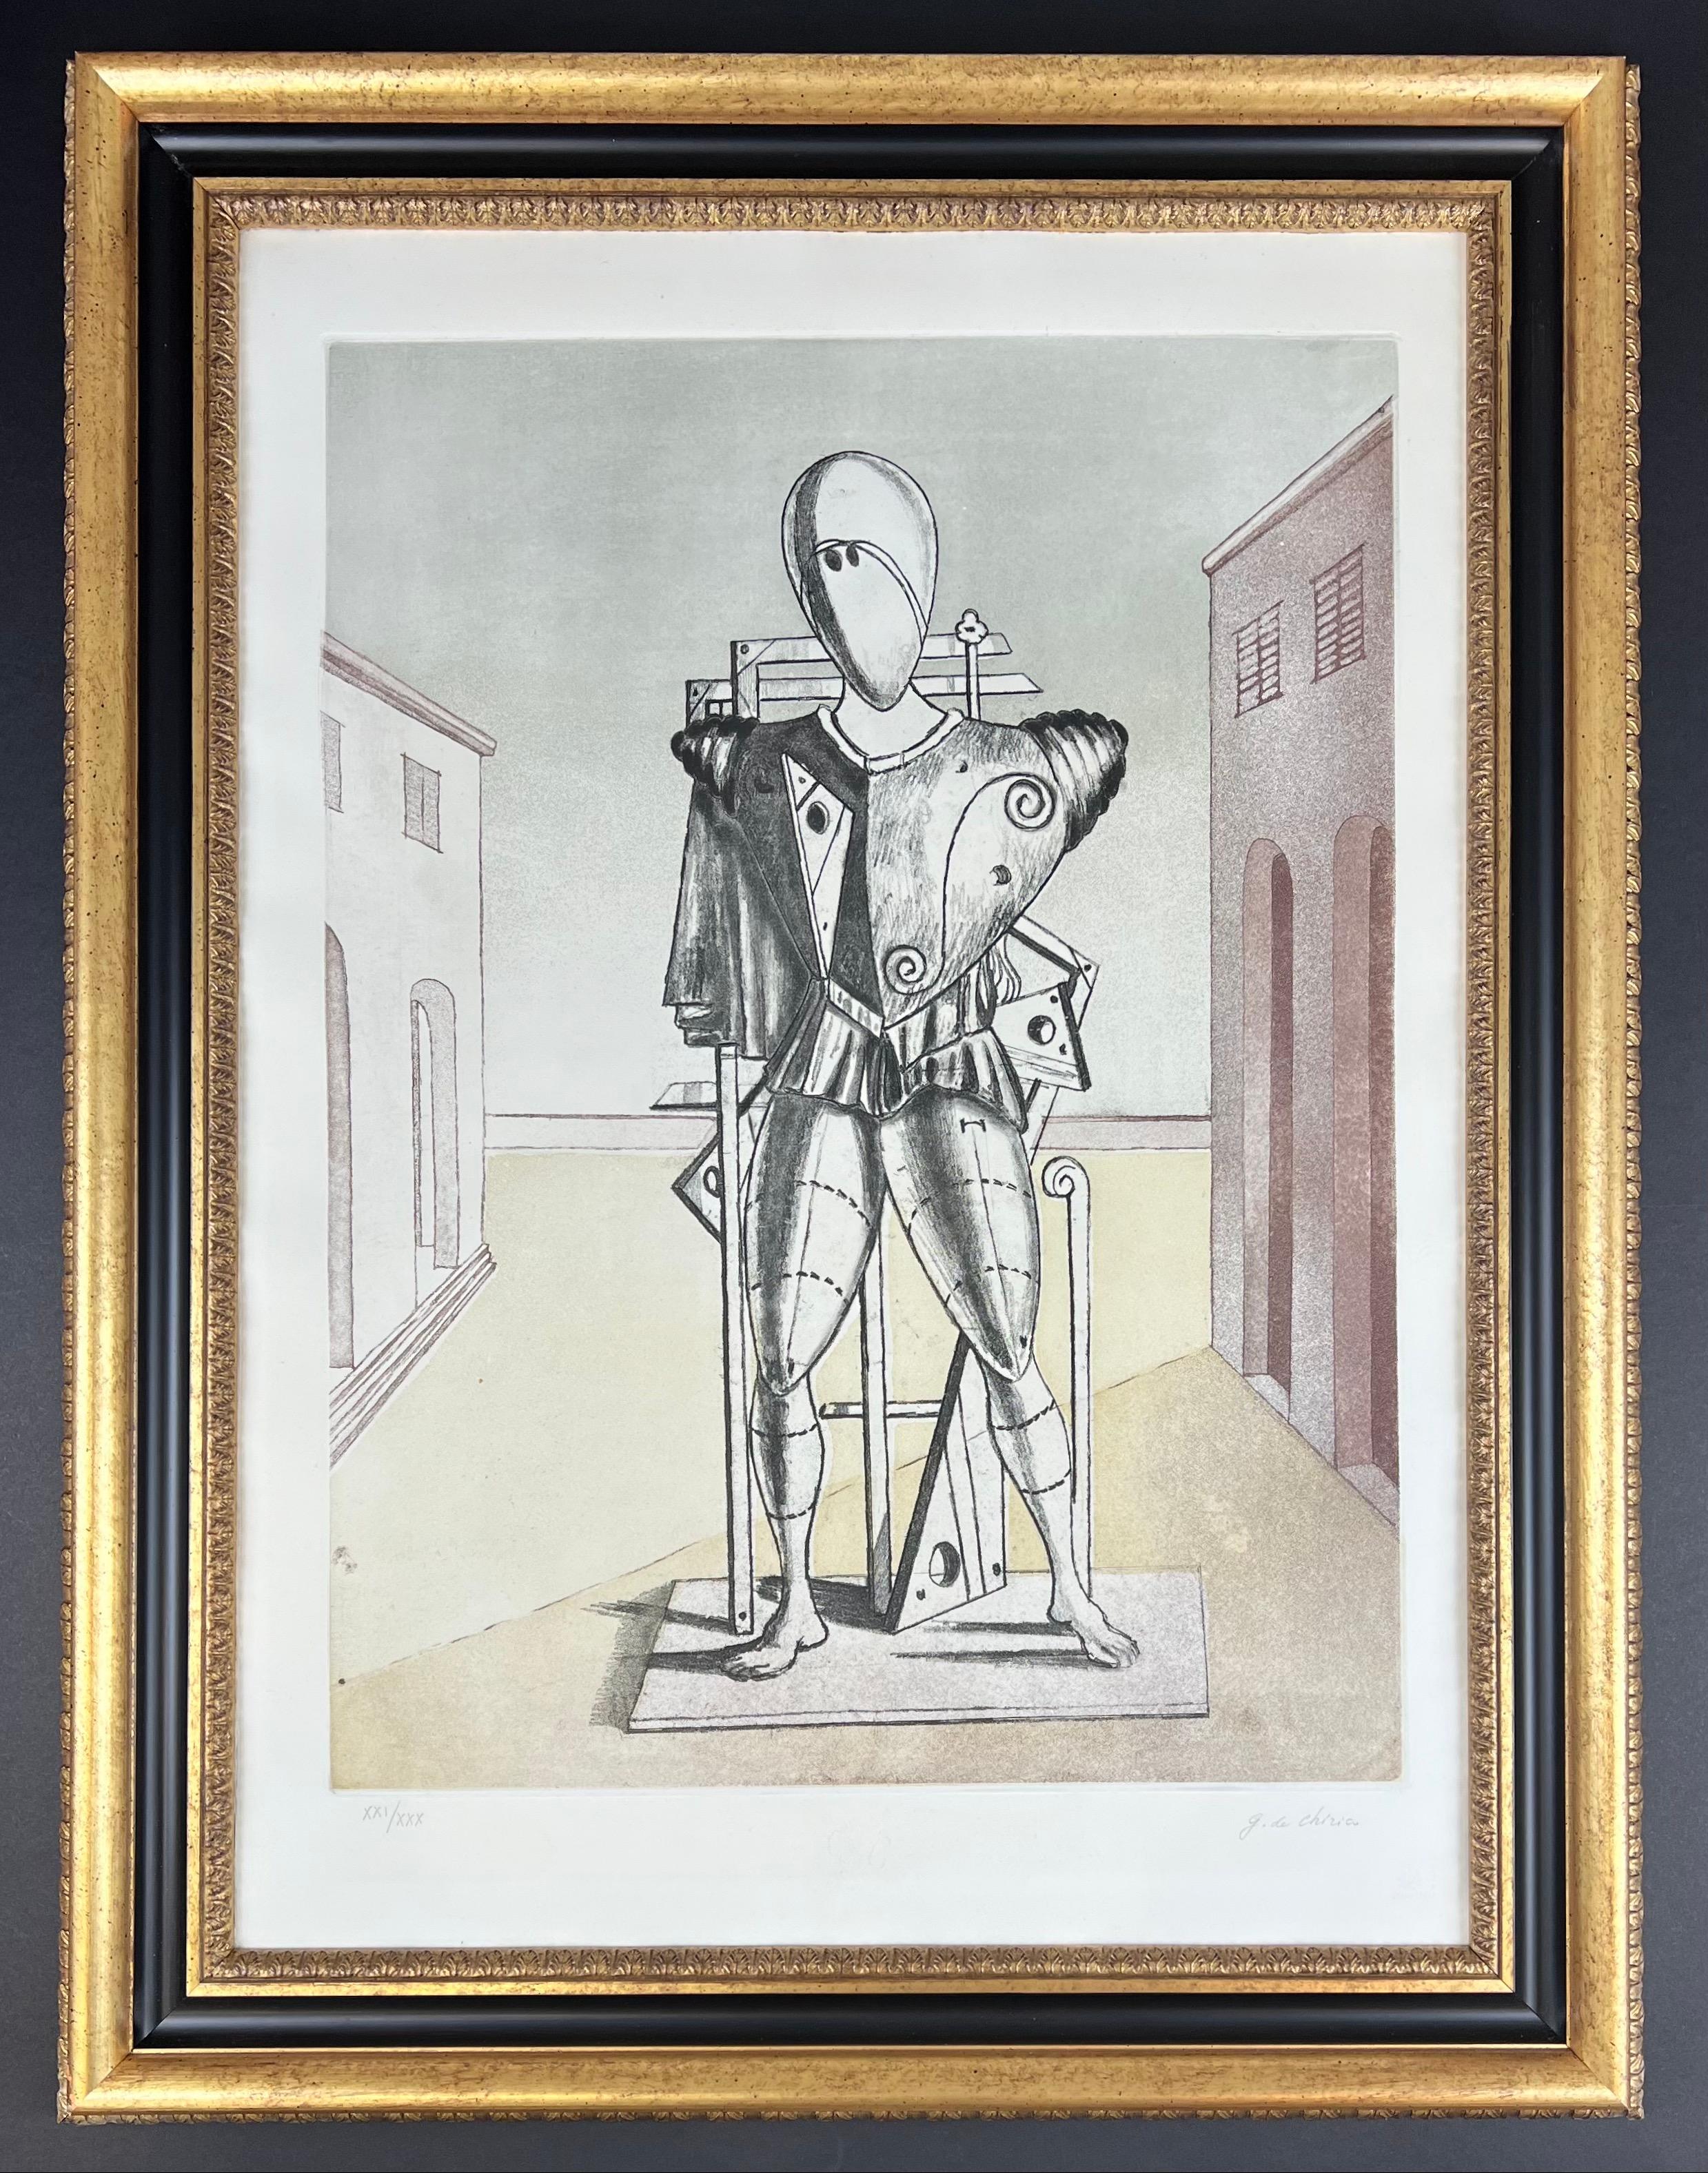 color etching on paper , edited in 1974
”Il Trovatore” , the most represented work by Giorgio De Chirico
signed in pencil by artist and numbered as: XXI/XXX
paper size: 70 x 50 cm
Framed size: 84 x 64,5 cm
important wooden frame included
Blindstamp: